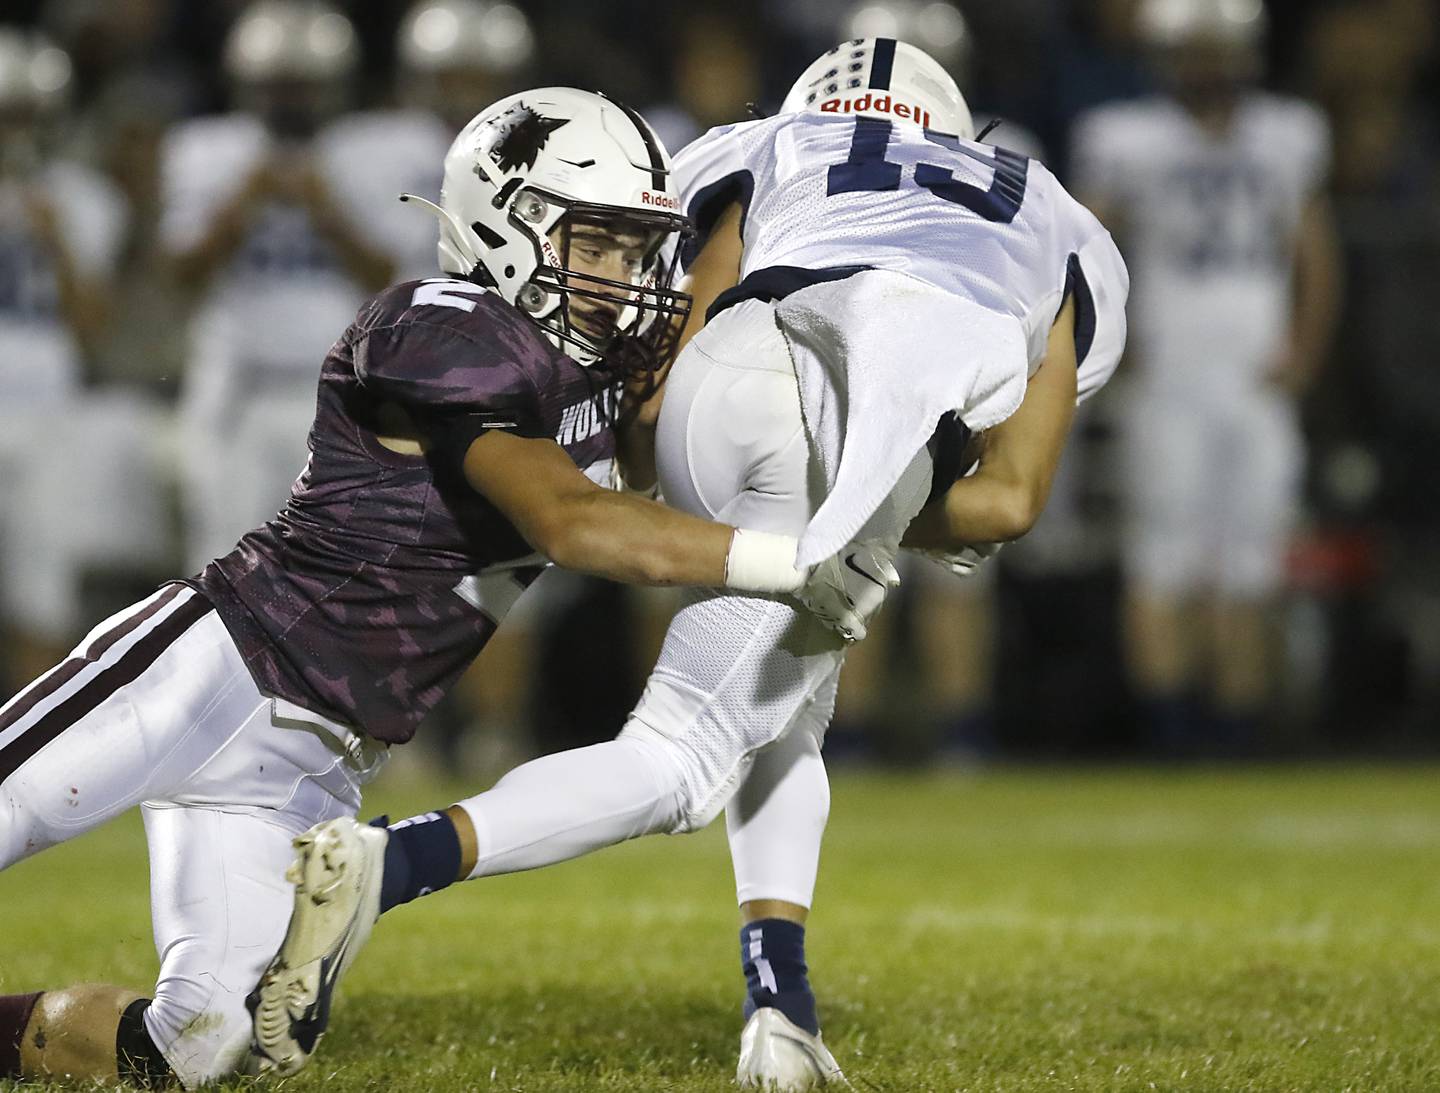 Prairie Ridge's Ryan Koelblinger tackles Cary-Grove's Andrew Prio during a Fox Valley Conference football game between Prairie Ridge  and Cary-Grove Friday, Sept. 23, 2022, at Prairie Ridge High School in Crystal Lake.